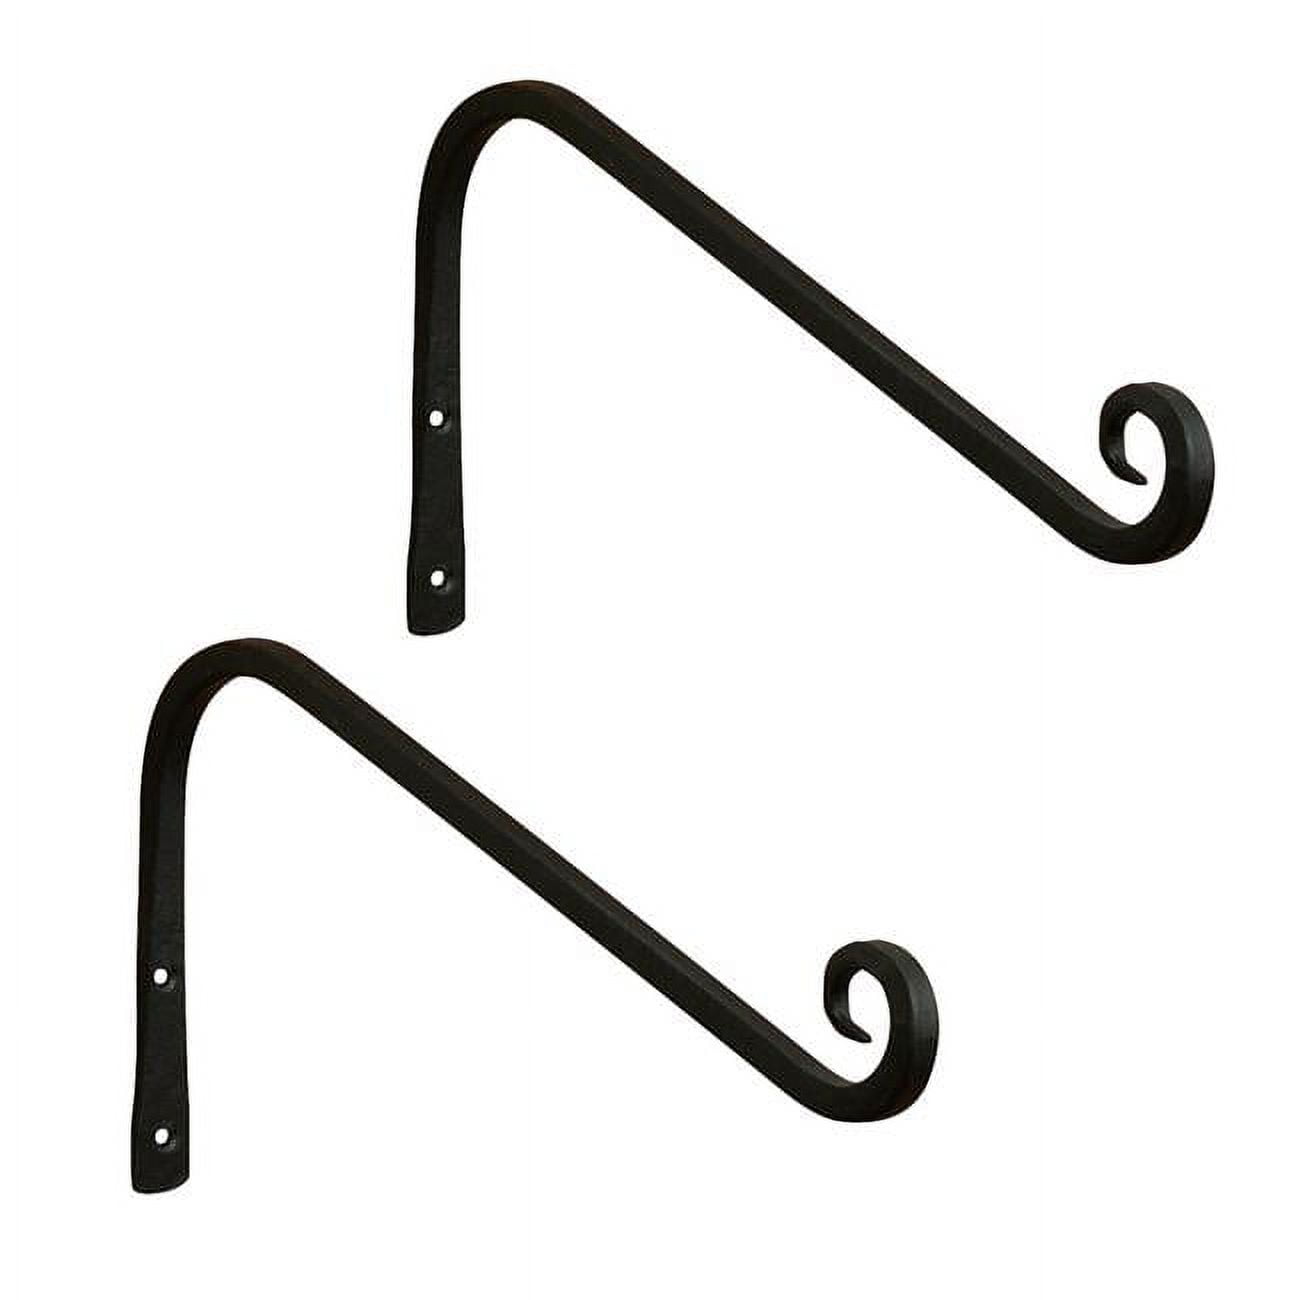 Picture of ACHLA Designs TSH-08-2 12 in. Angled Upcurled Bracket, Black - Pack of 2